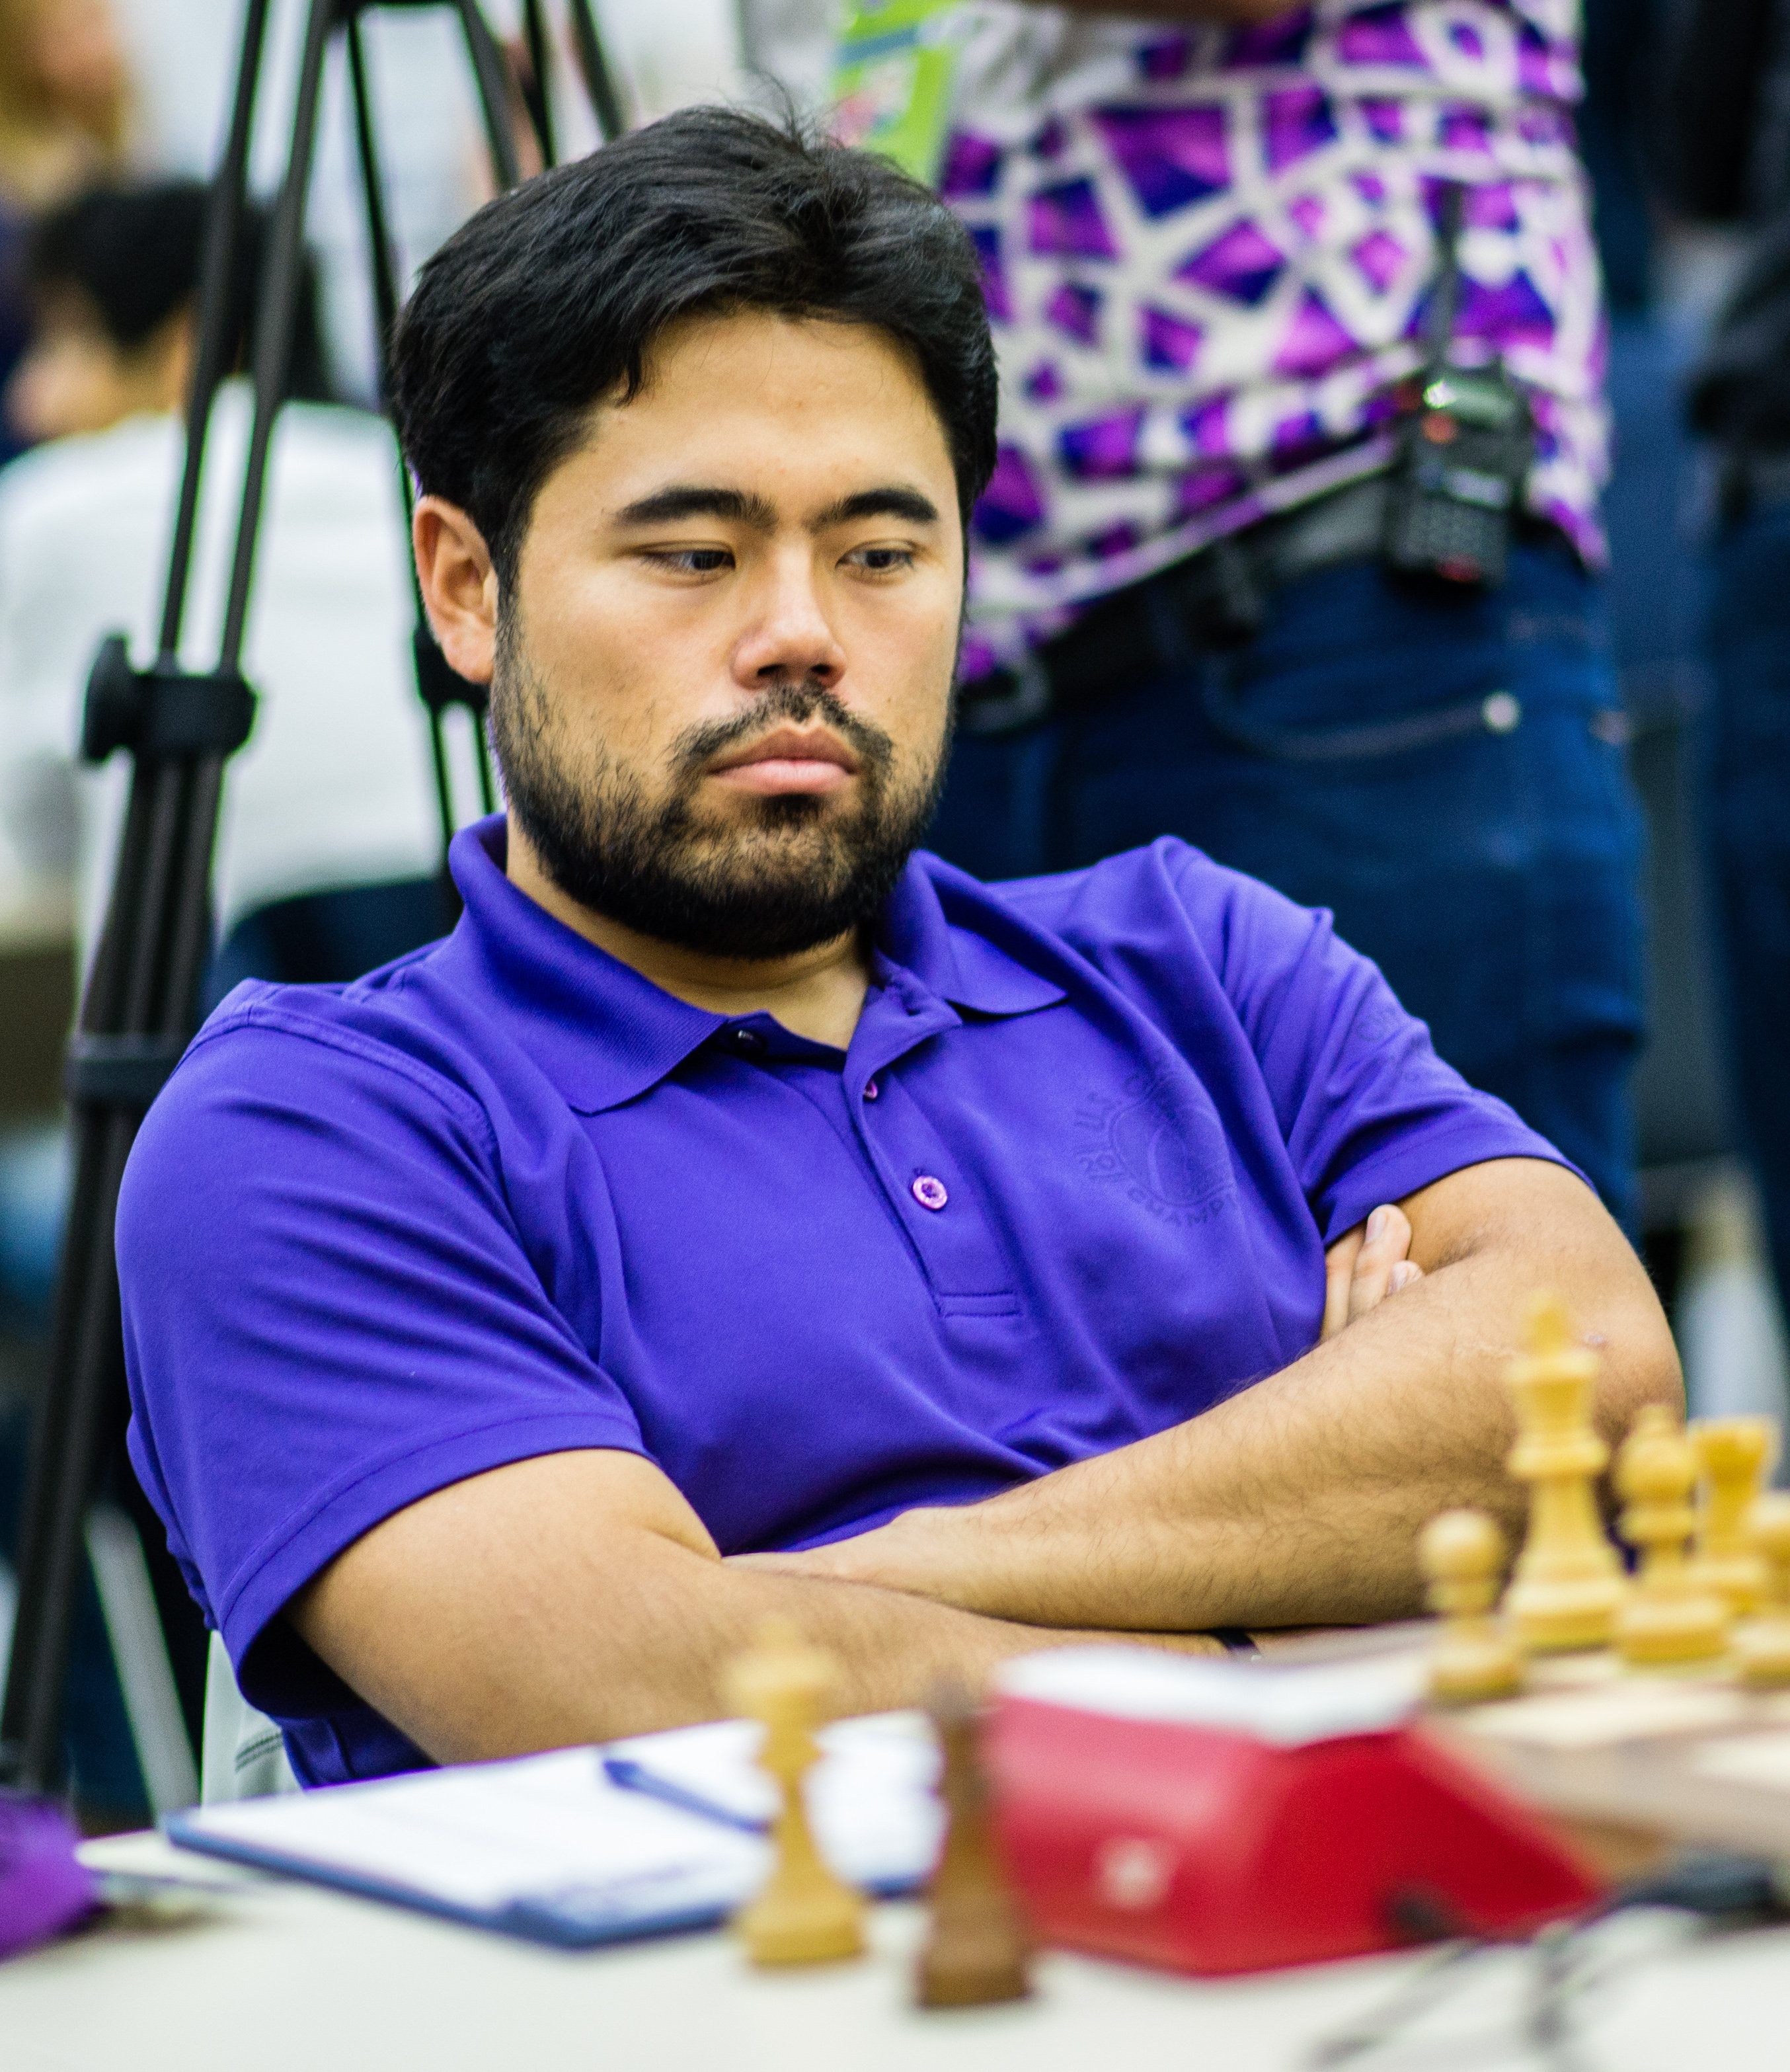 chess24 - For the 1st time in 8 years Hikaru Nakamura is back as the world  no. 2! Not bad for a streamer?    image: 2700chess